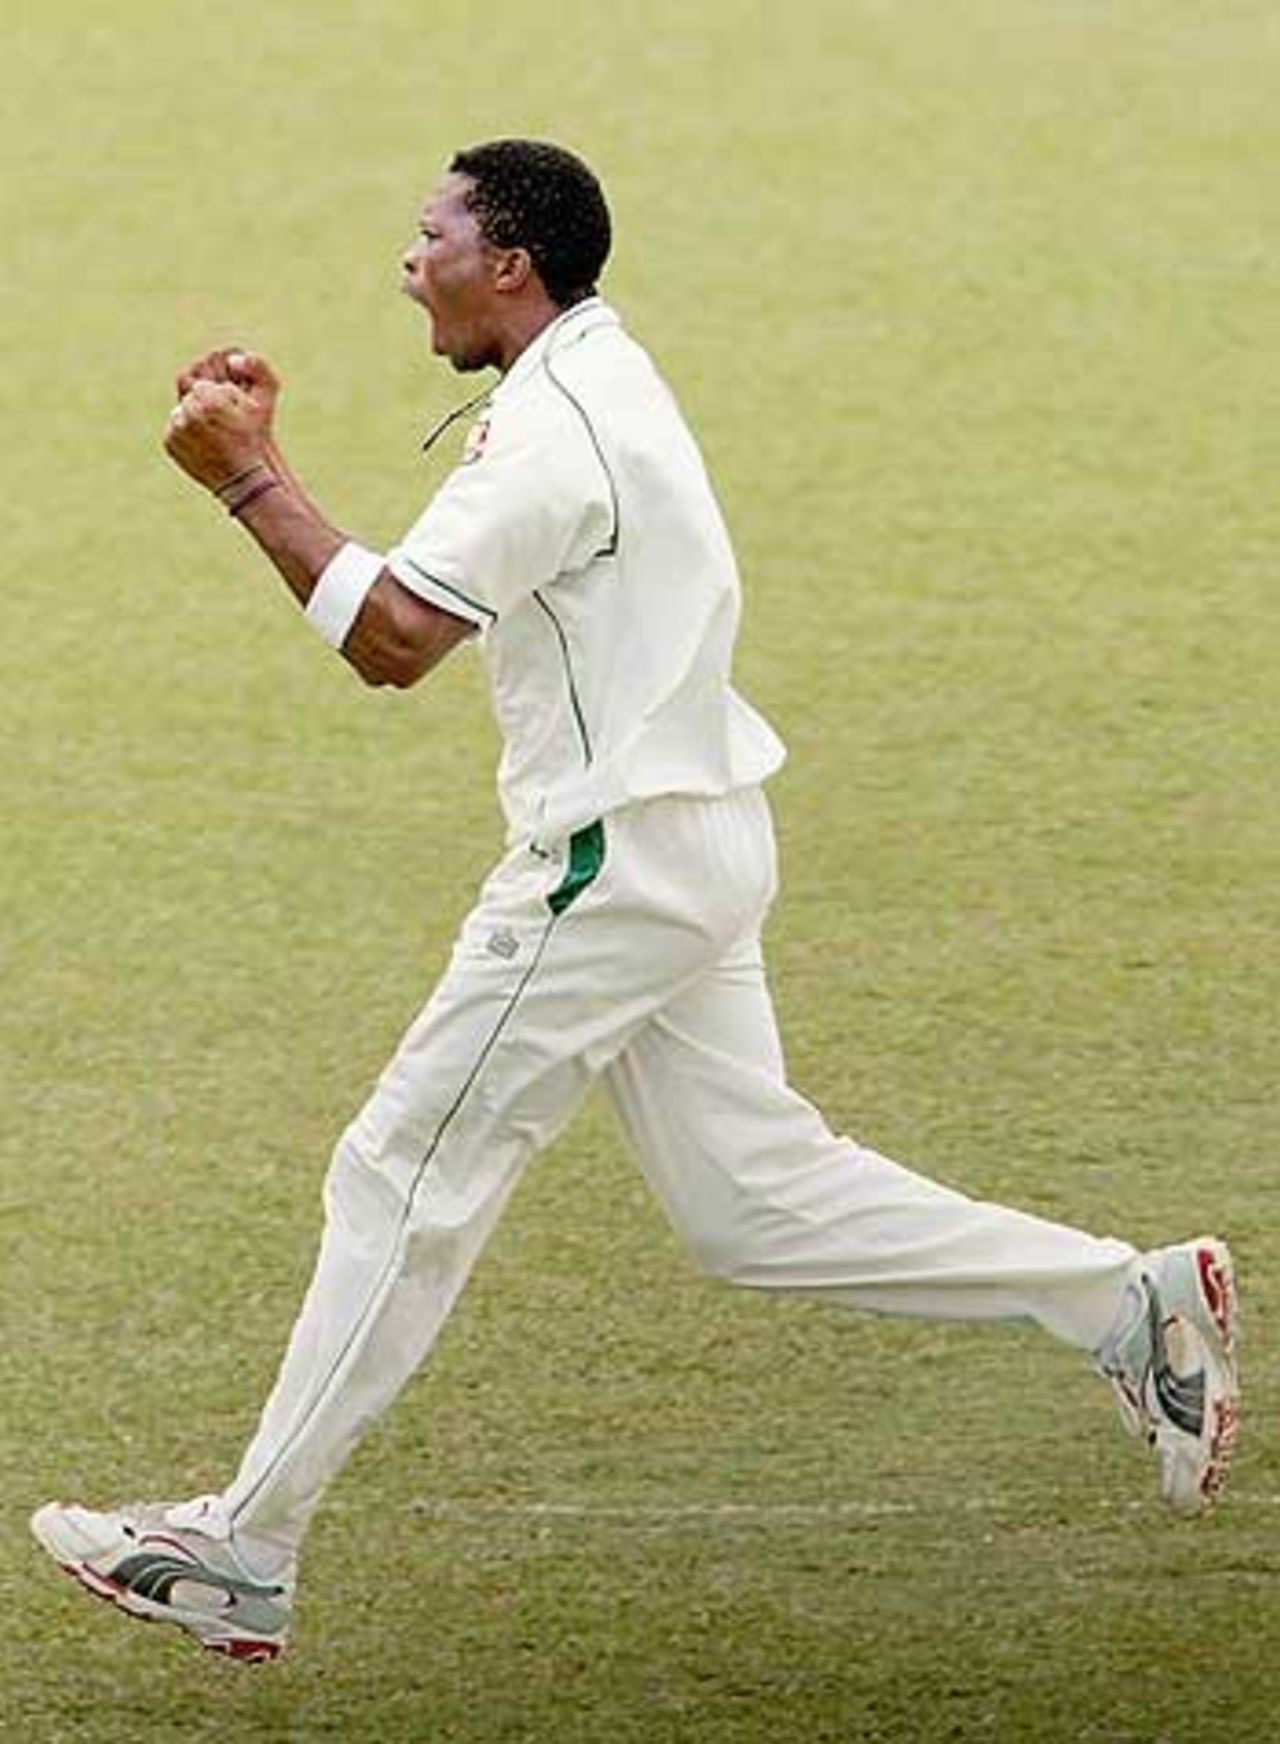 Makhaya Ntini celebrates during the second Test at Trinidad, West Indies v South Africa, April 8, 2005